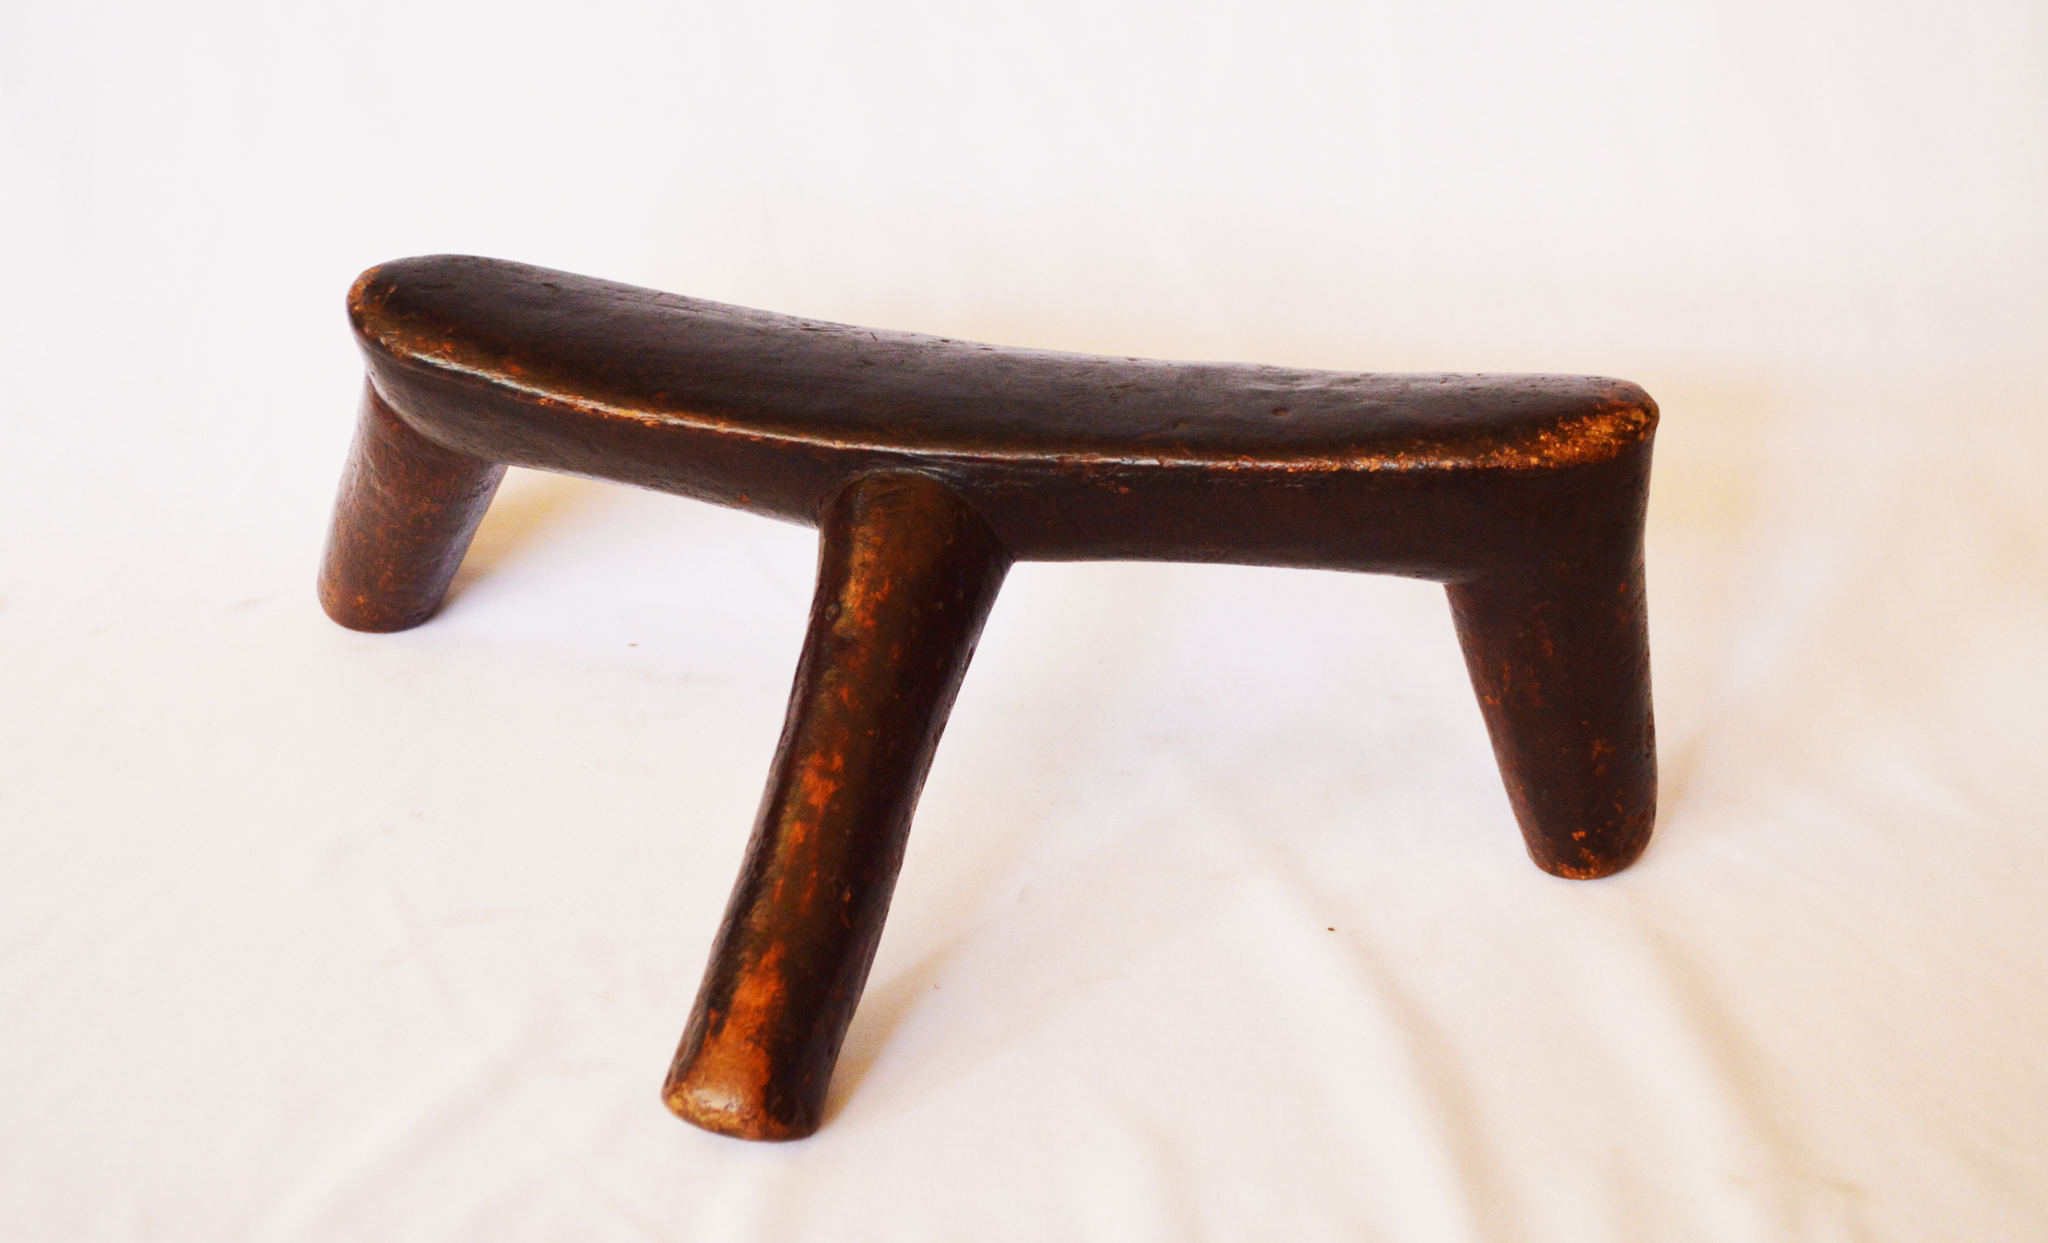 Karamajong 3 legged Headrest - Authentic African handicrafts | Clothing, bags, painting, toys & more - CULTURE HUB by Muthoni Unchained